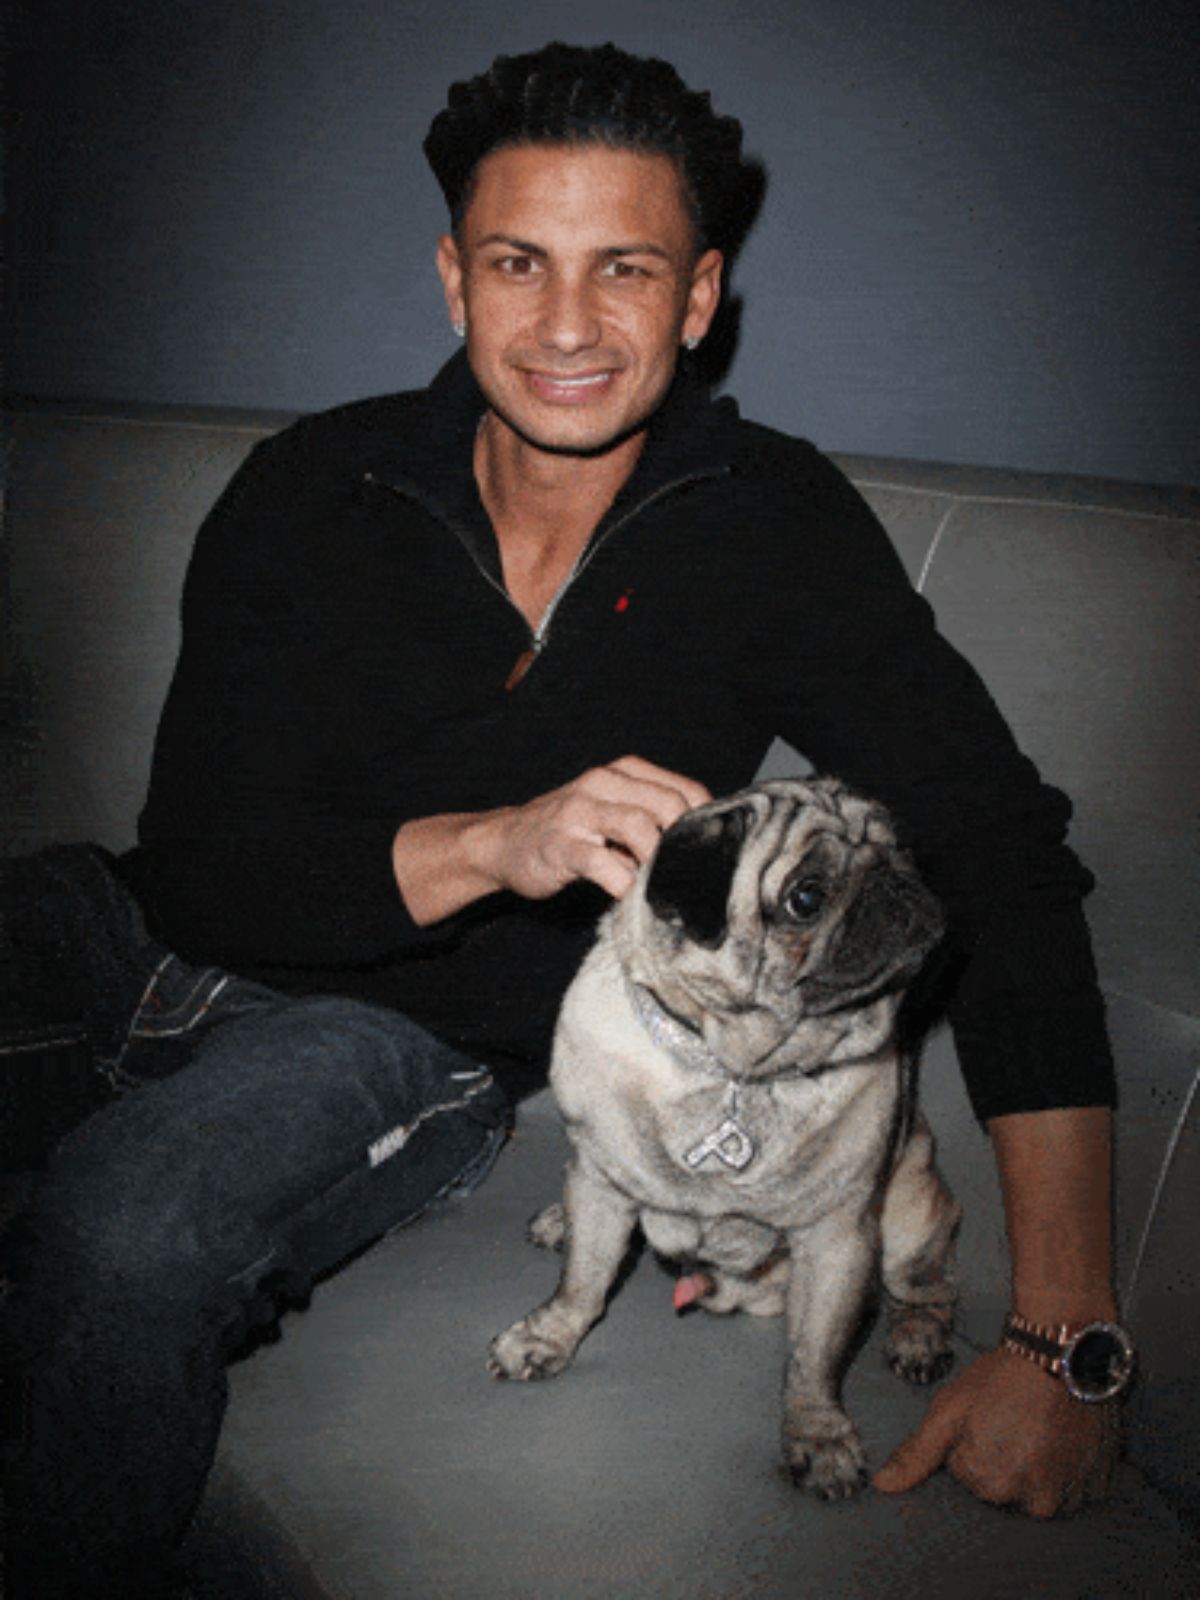 DJ Pauly D sitting on the couch beside his Pug